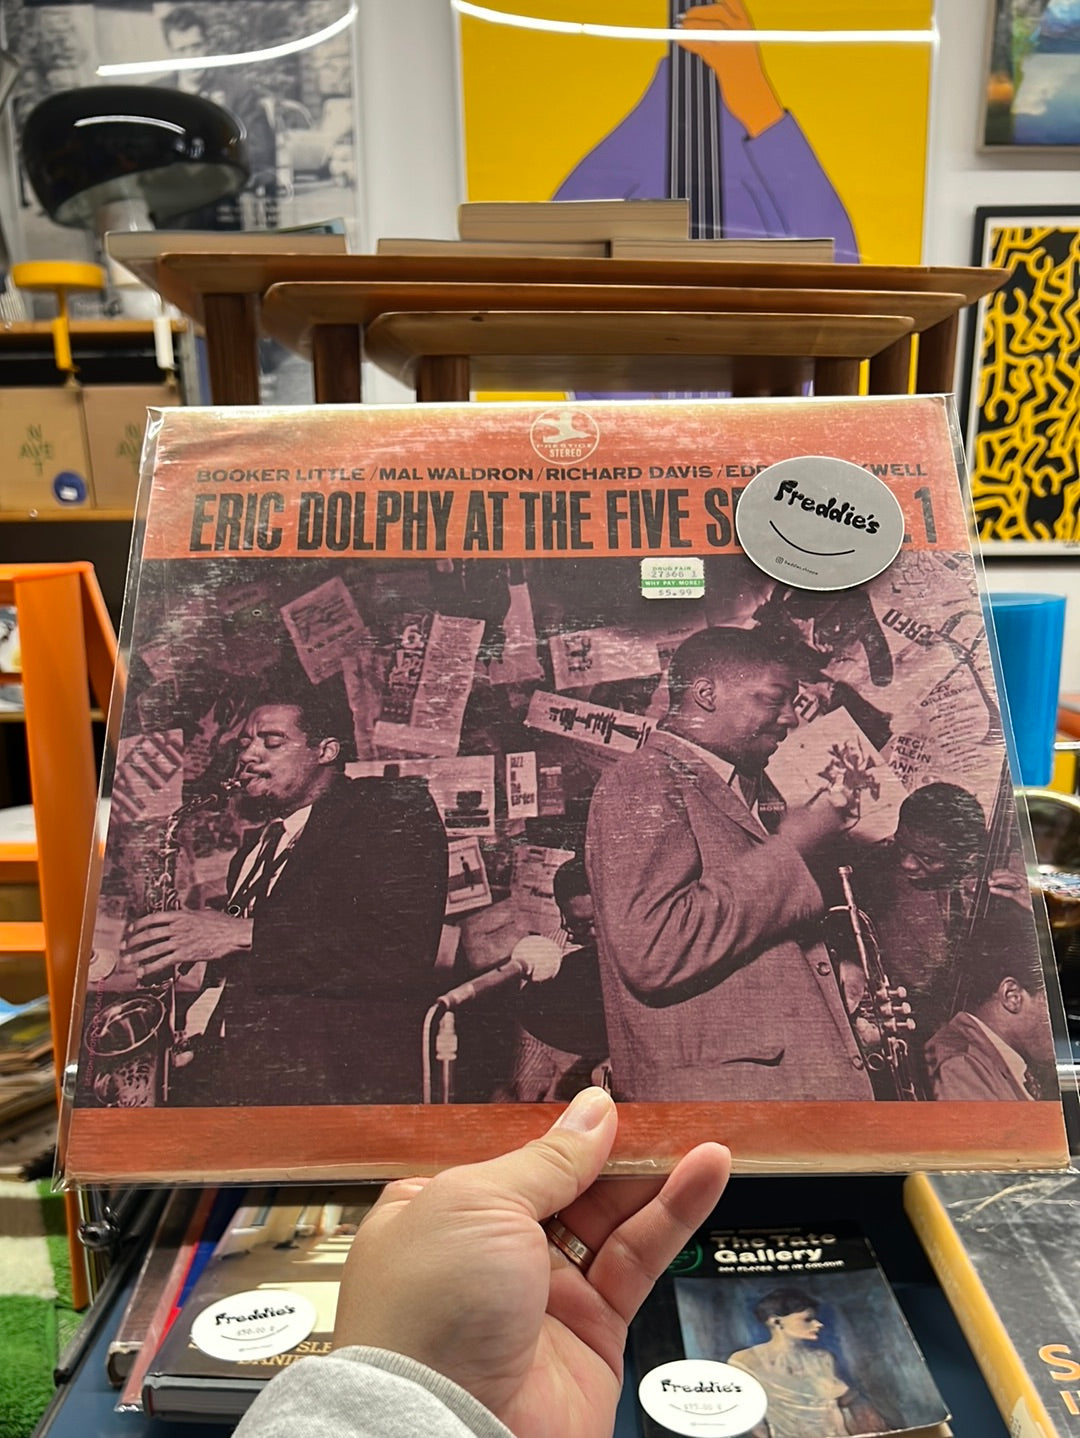 Eric Dolphy at the five spot vol 1 Prestige 7611 SEALED